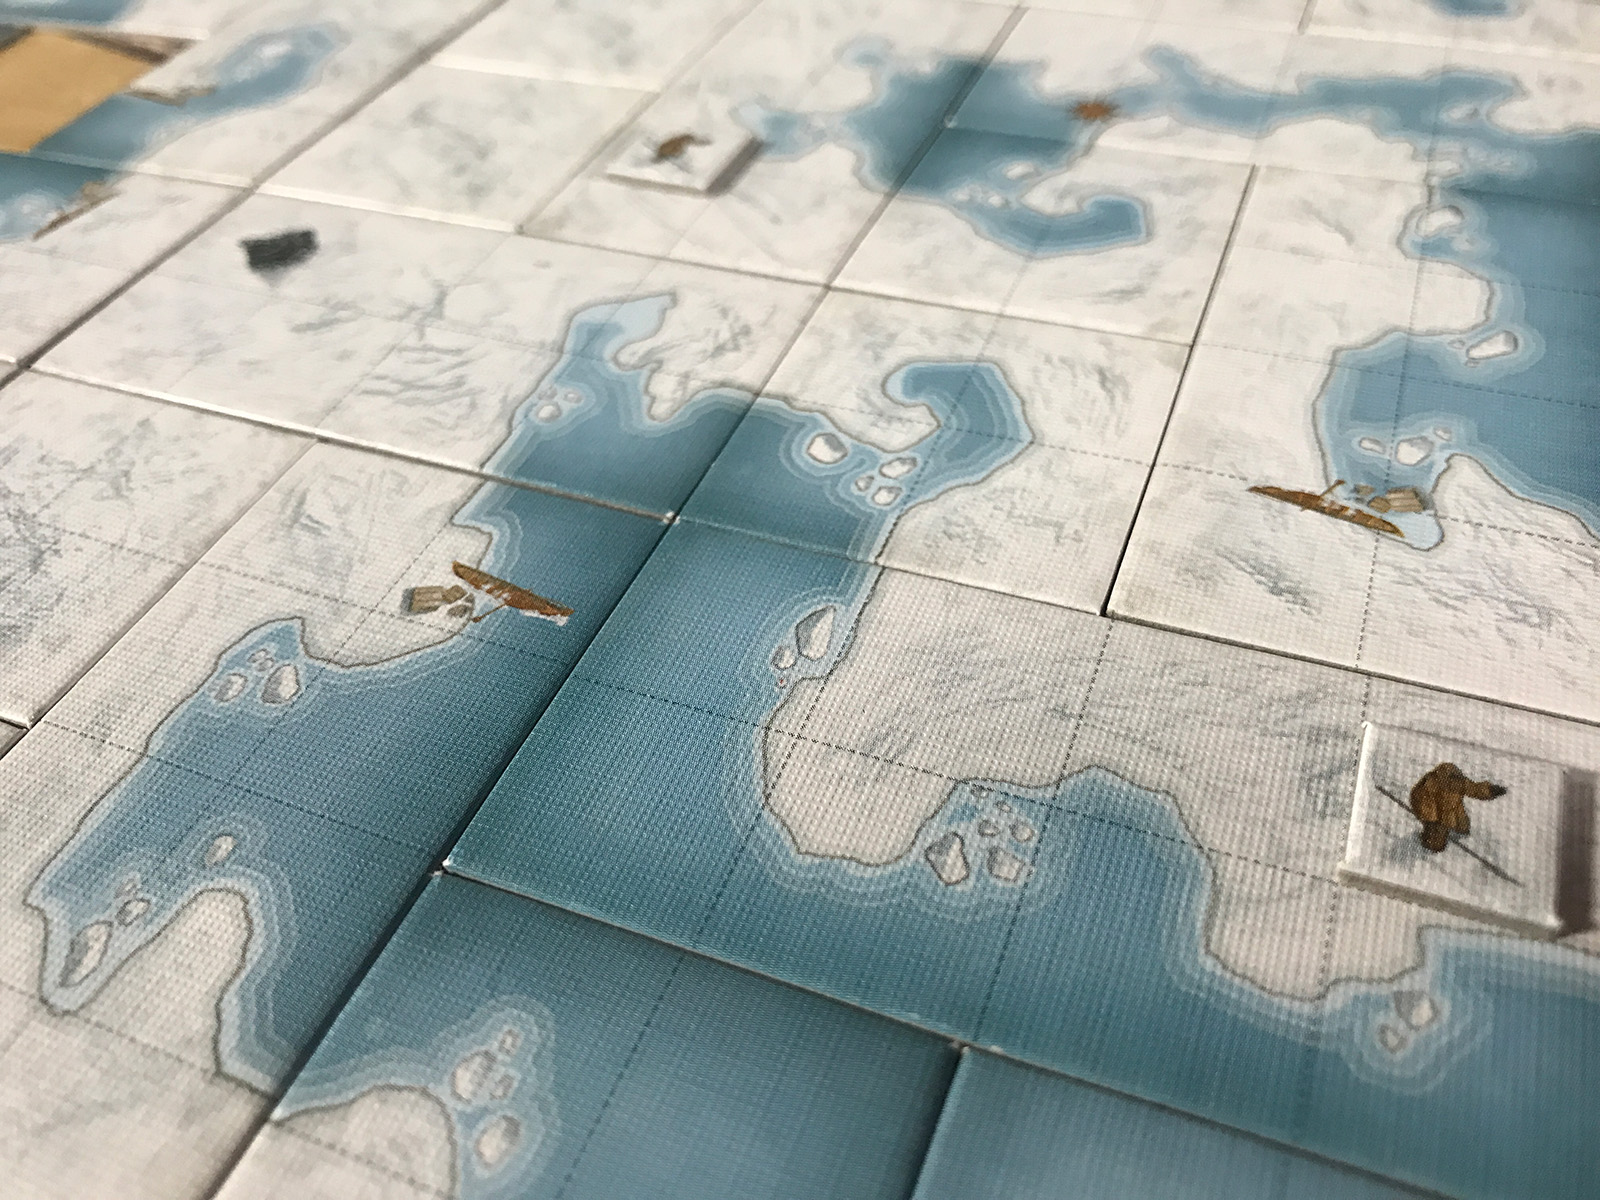 Trying Another Strategy to Find Victory Points in Expedition: Northwest Passage